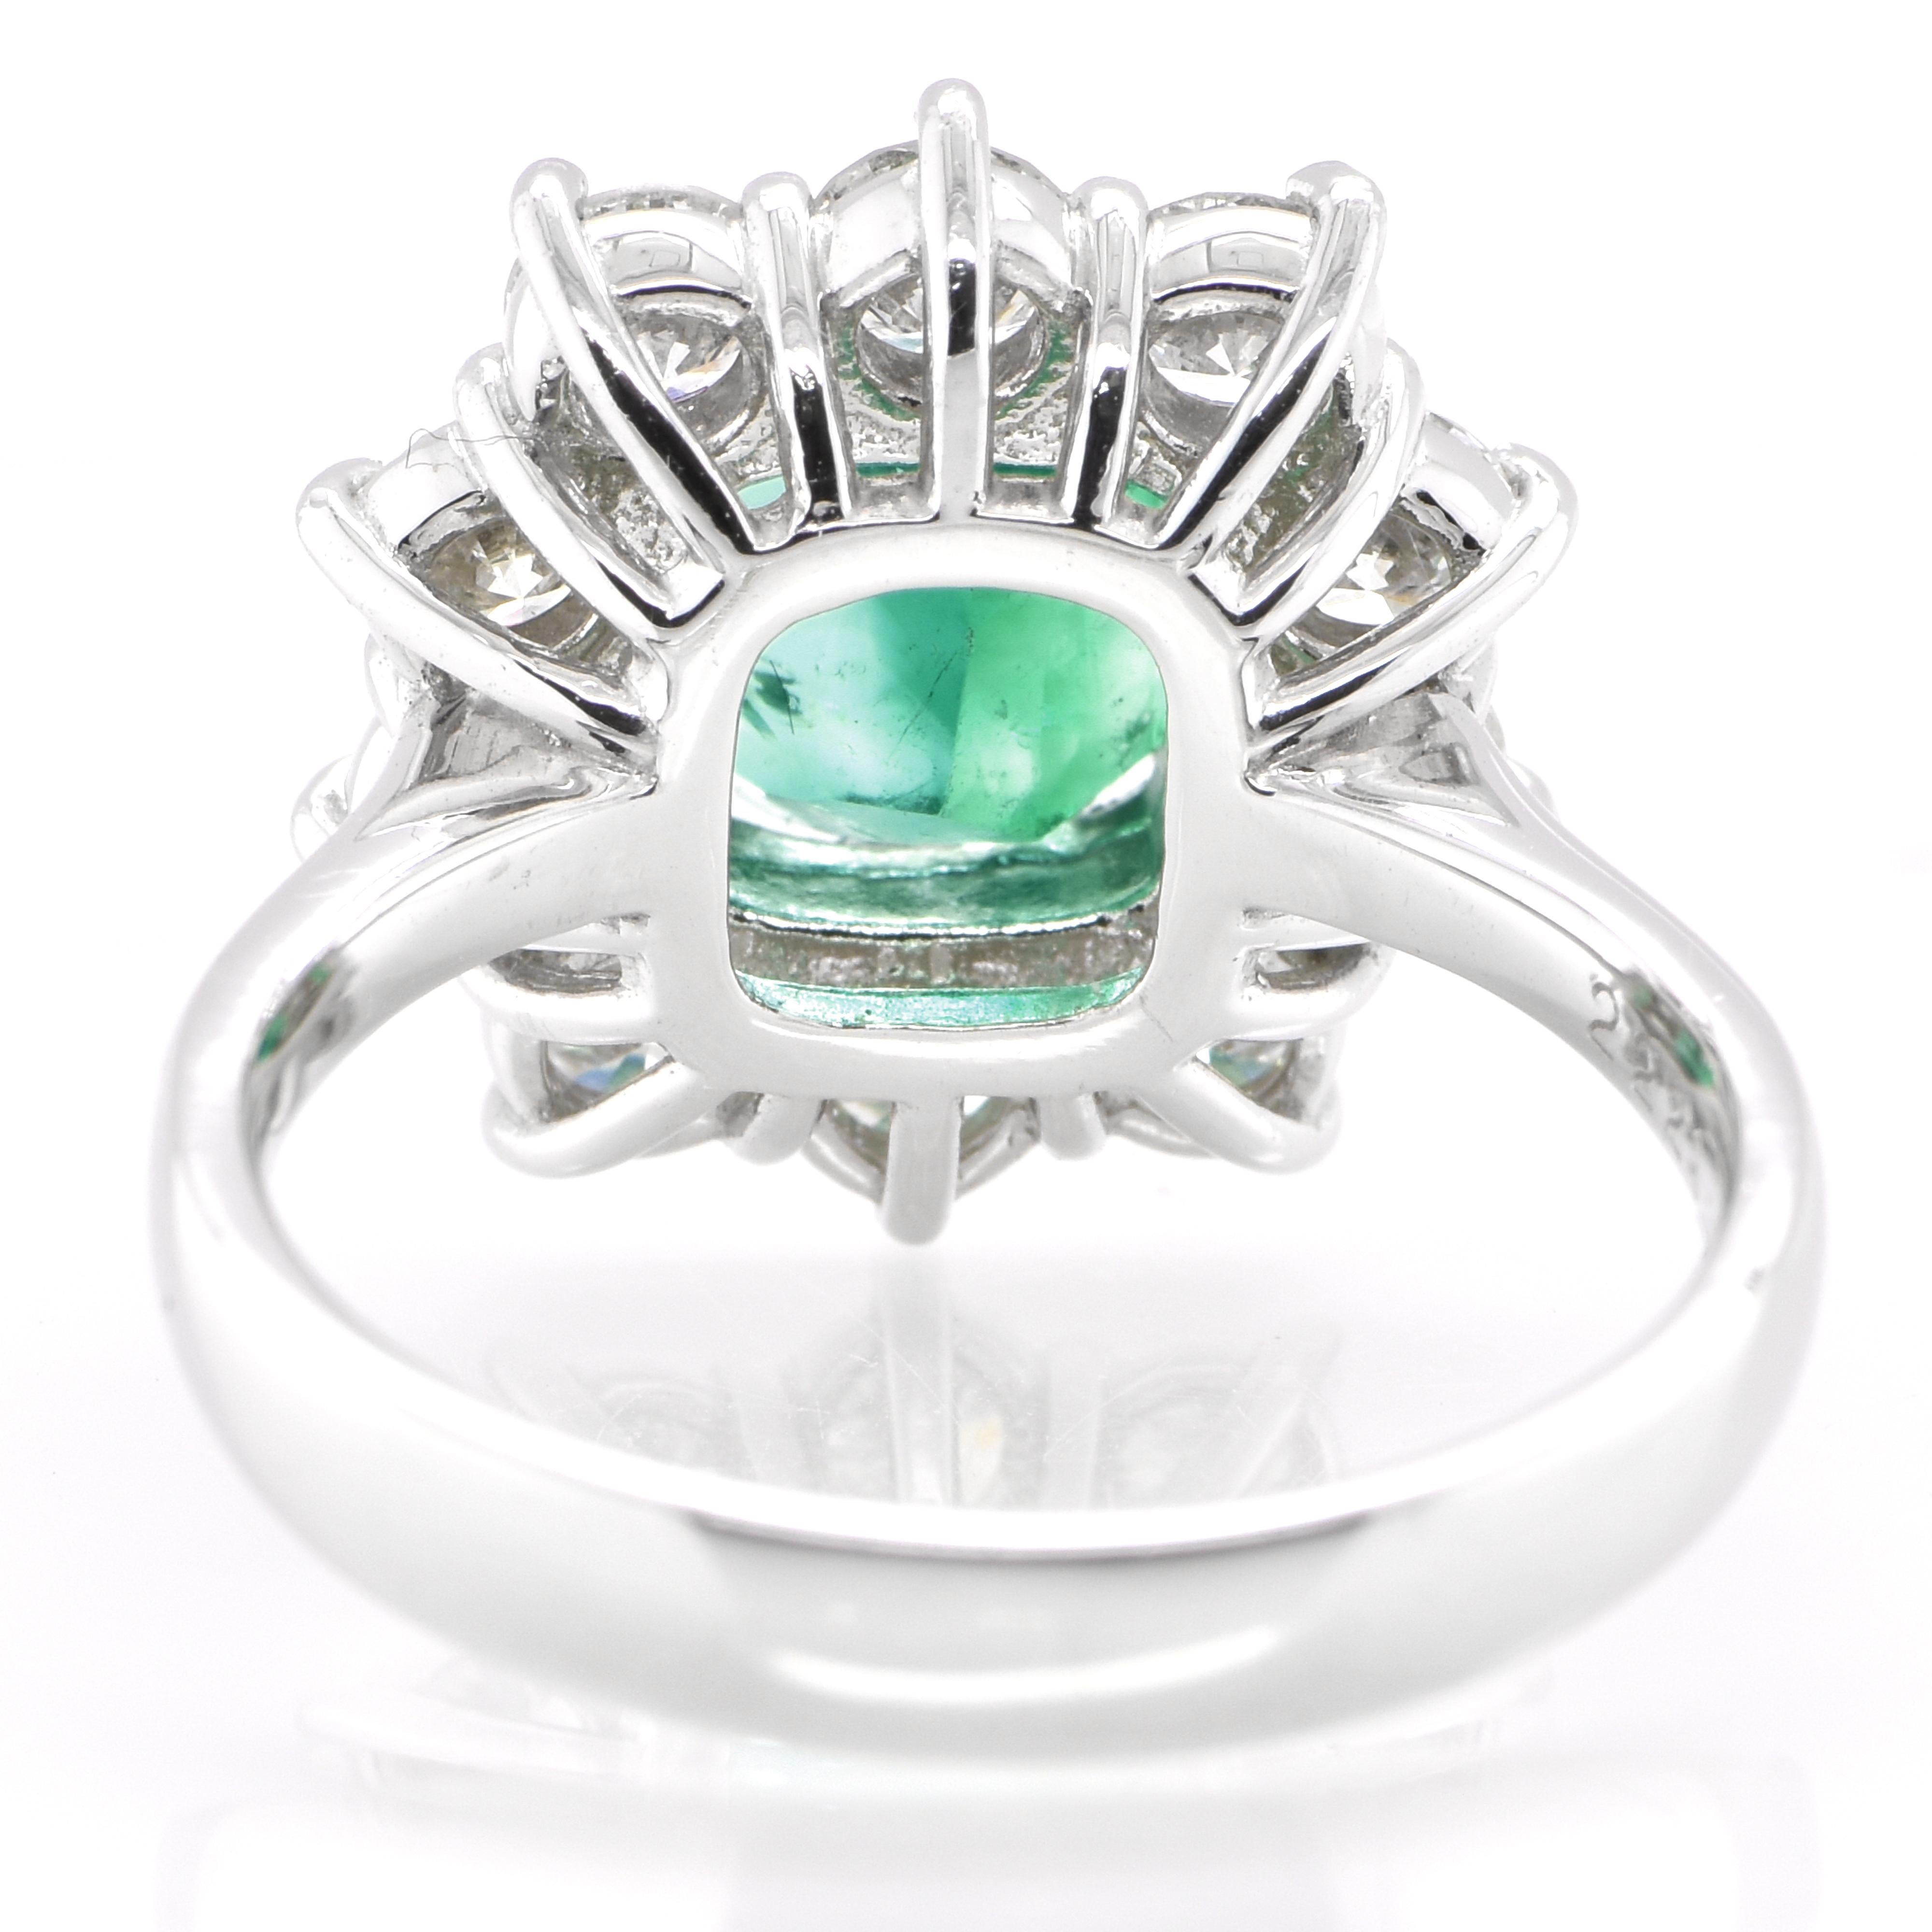 Women's GIA Certified 2.22 Carat Natural Colombian Emerald Ring Set in Platinum